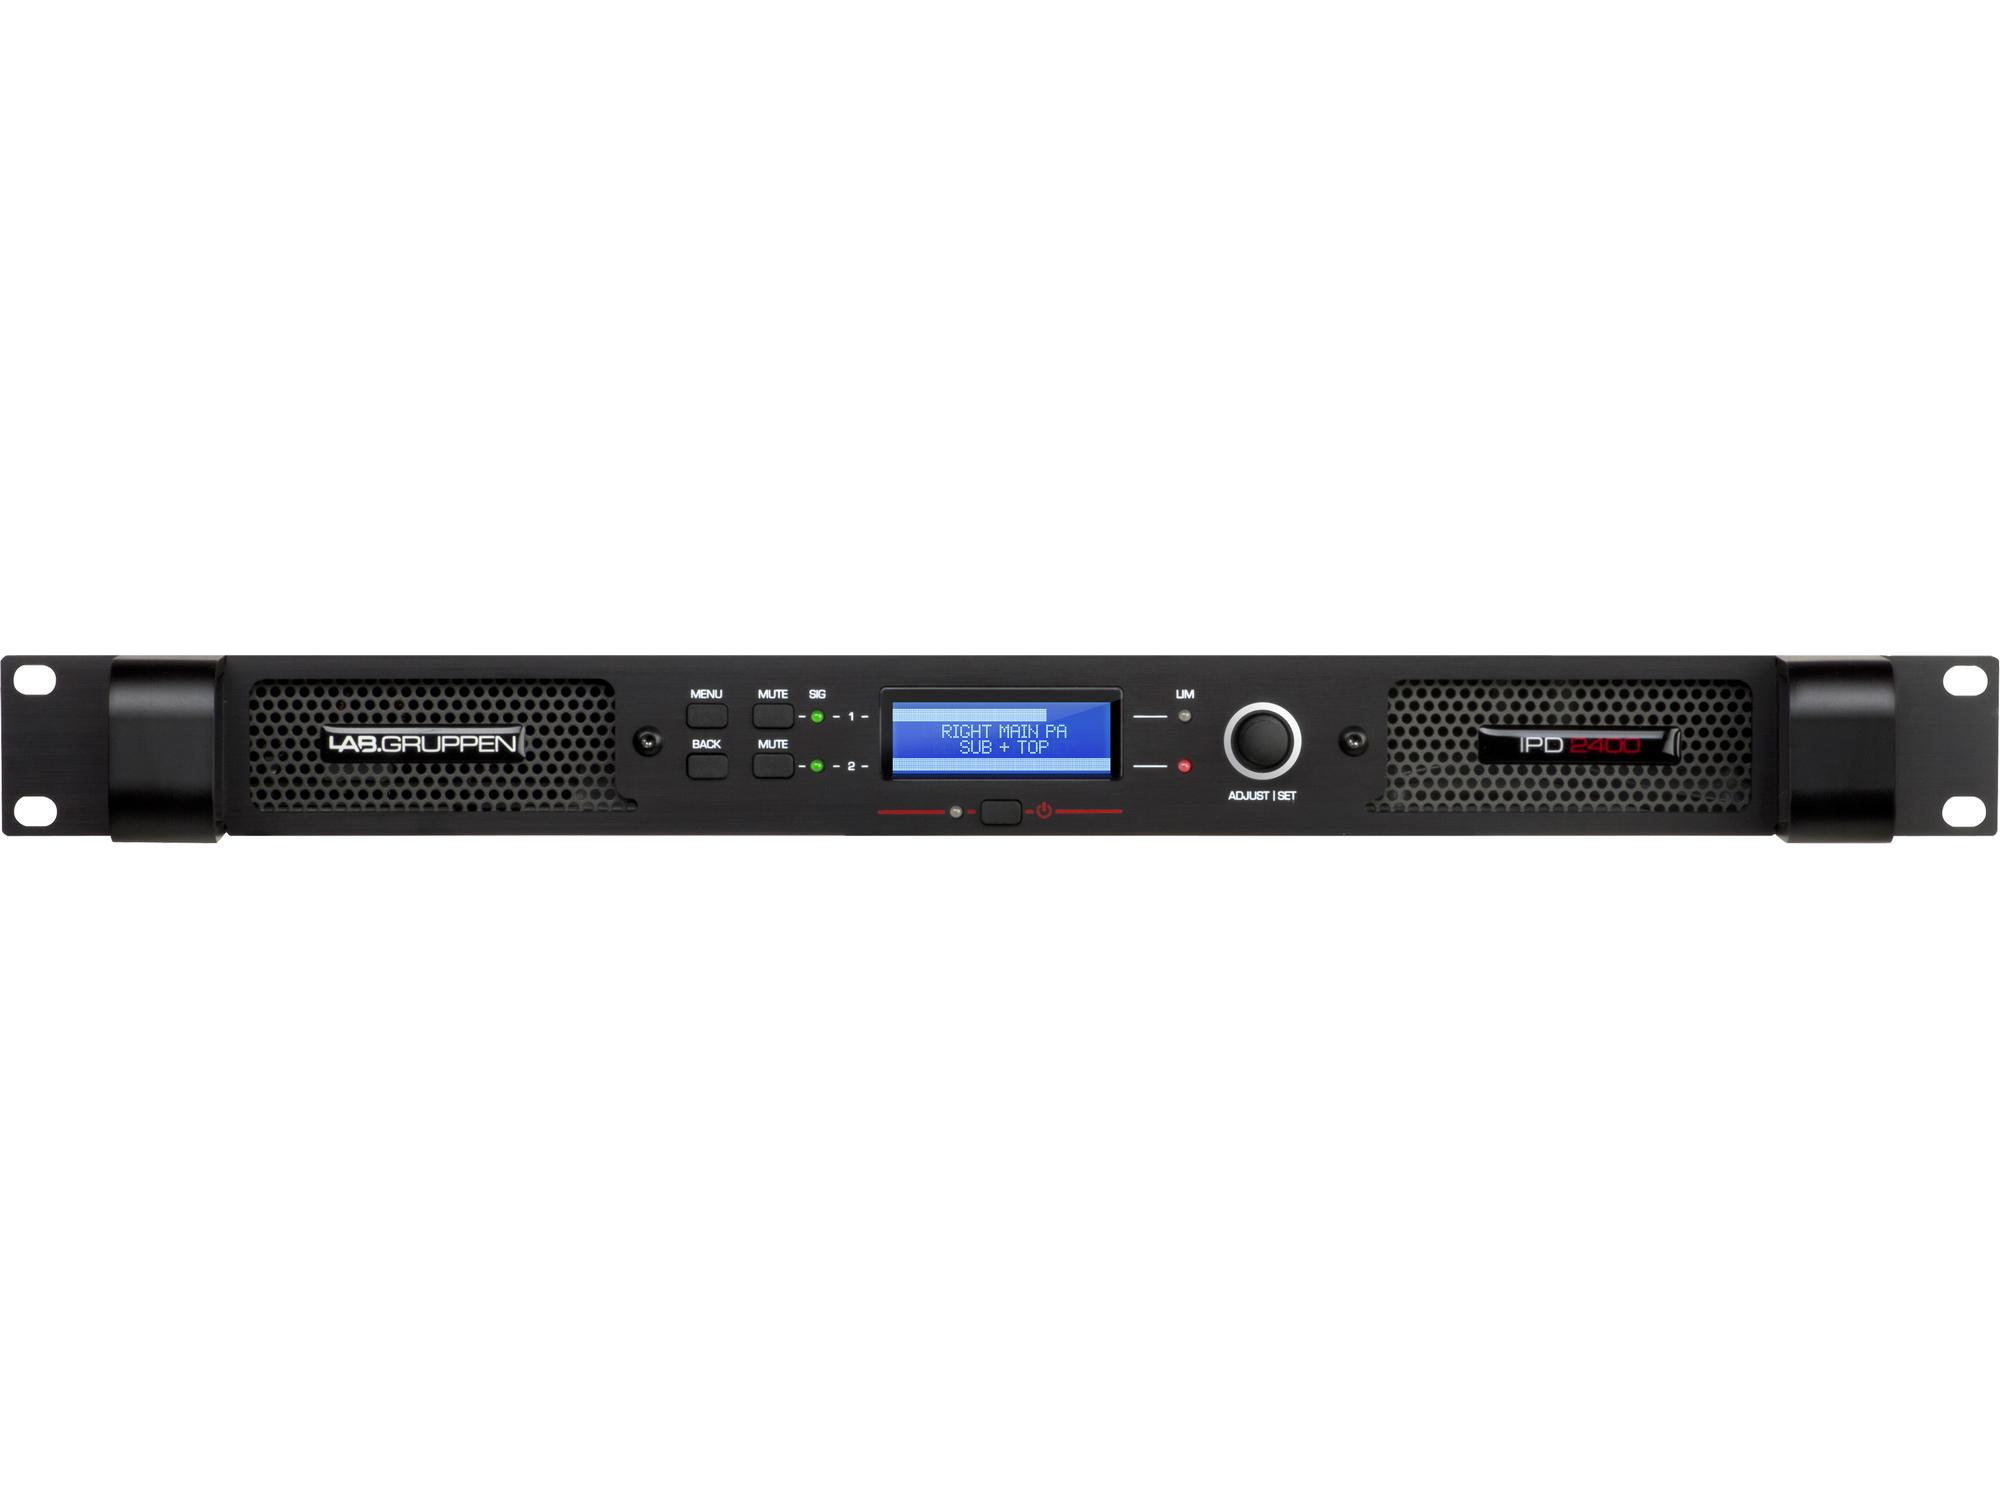 IPD 2400 Compact 2400 Watt 2-Channel DSP Controlled Power Amplifier by Lab.gruppen